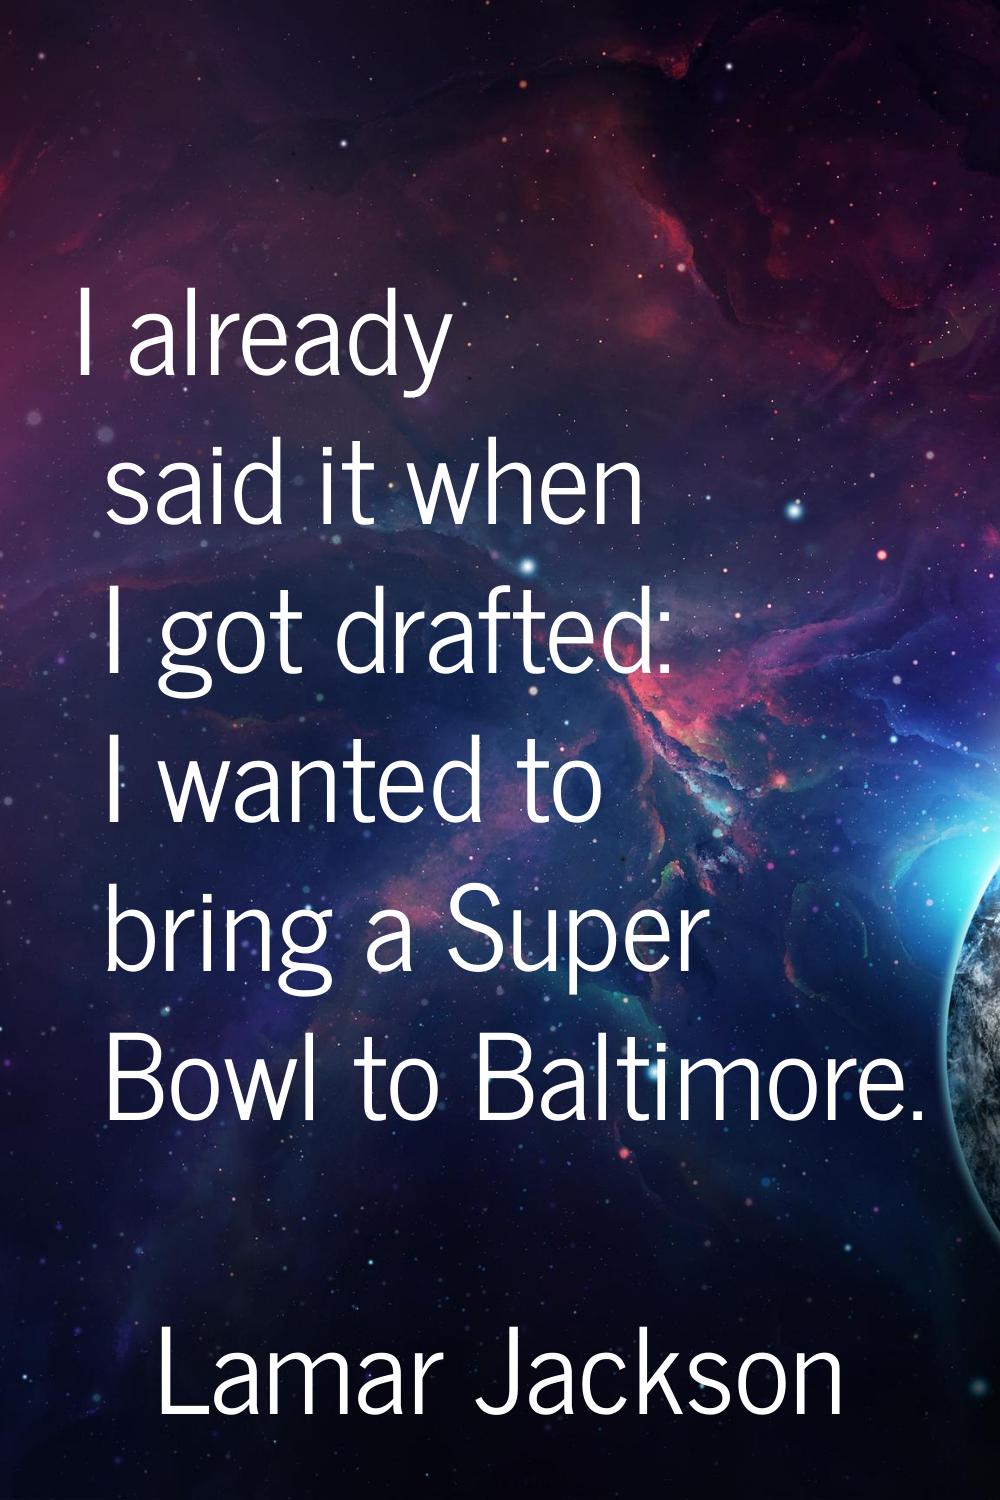 I already said it when I got drafted: I wanted to bring a Super Bowl to Baltimore.